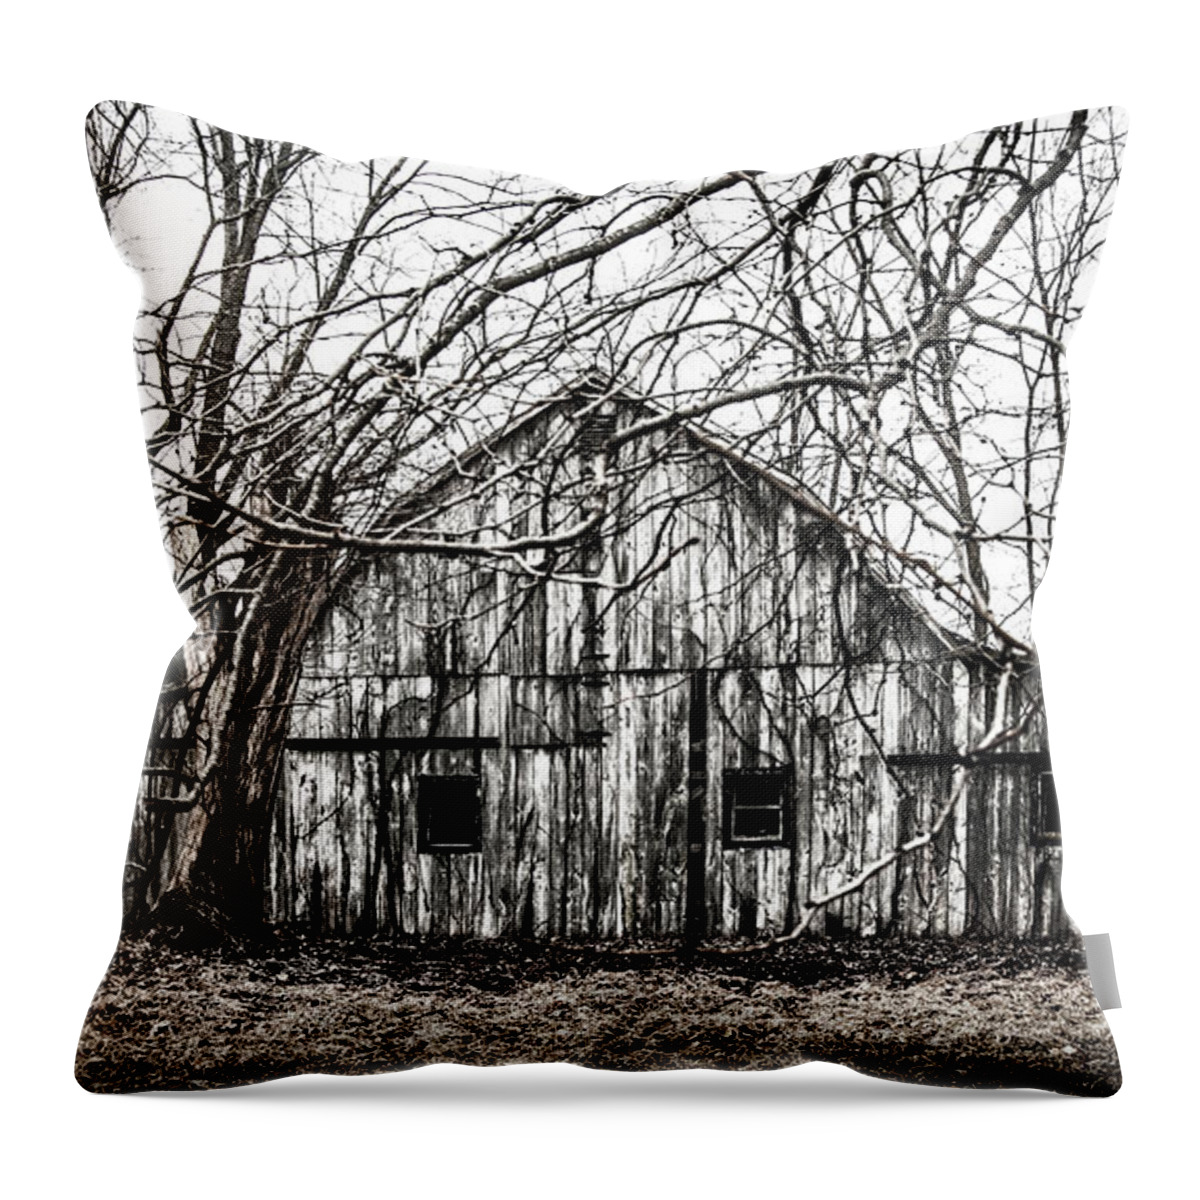 Barn Throw Pillow featuring the photograph Abandoned Barn Highway 6 V2 by Michael Arend